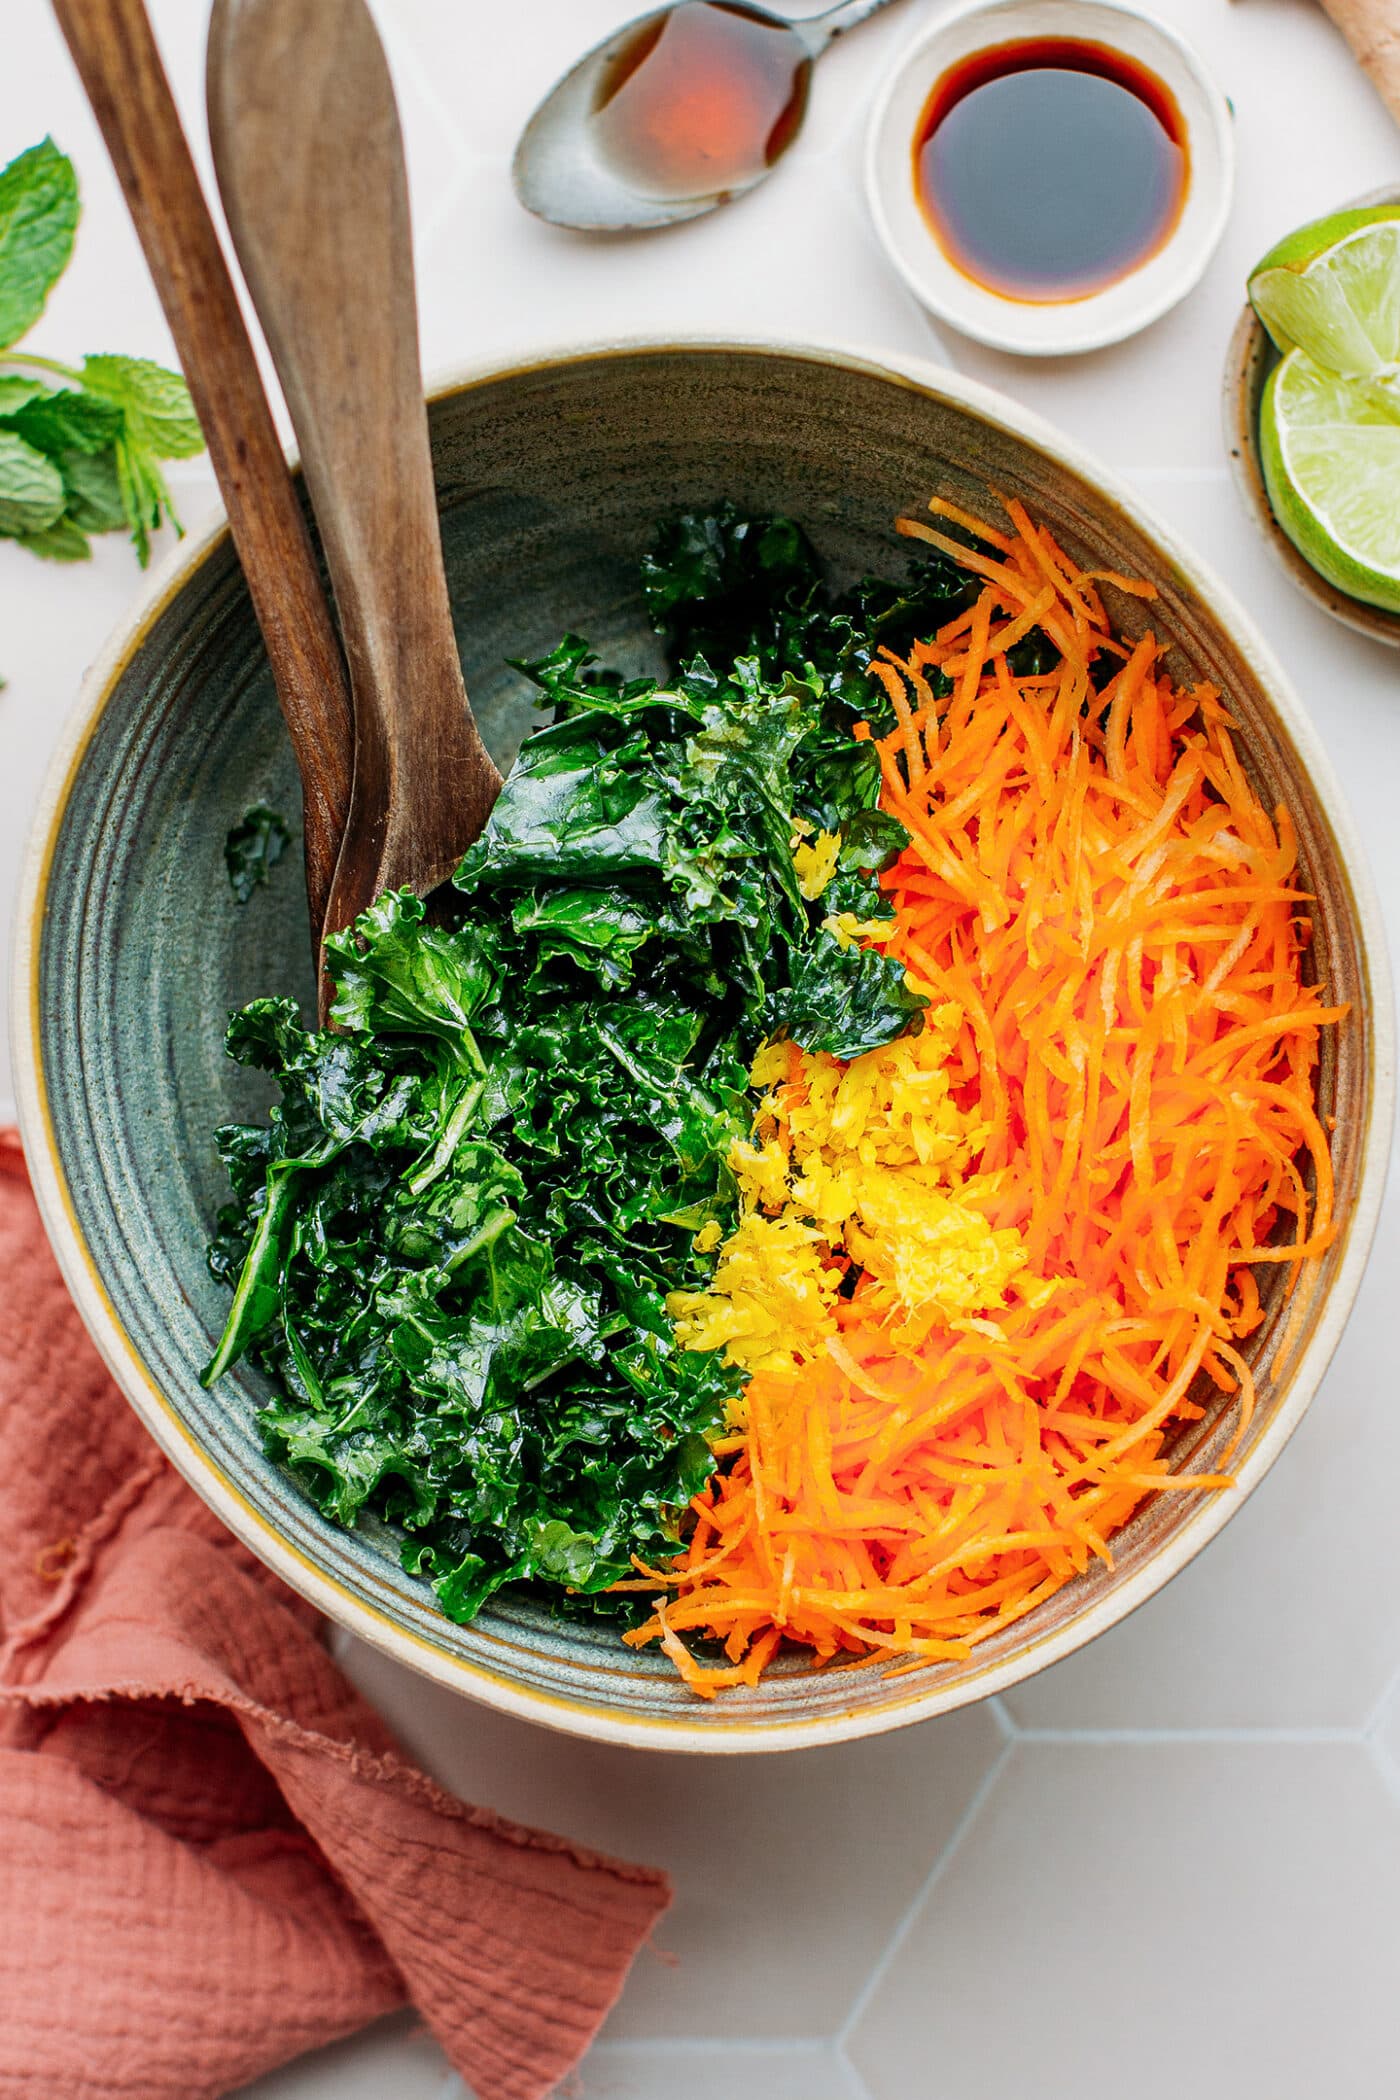 Kale, carrots, and ginger in a bowl.